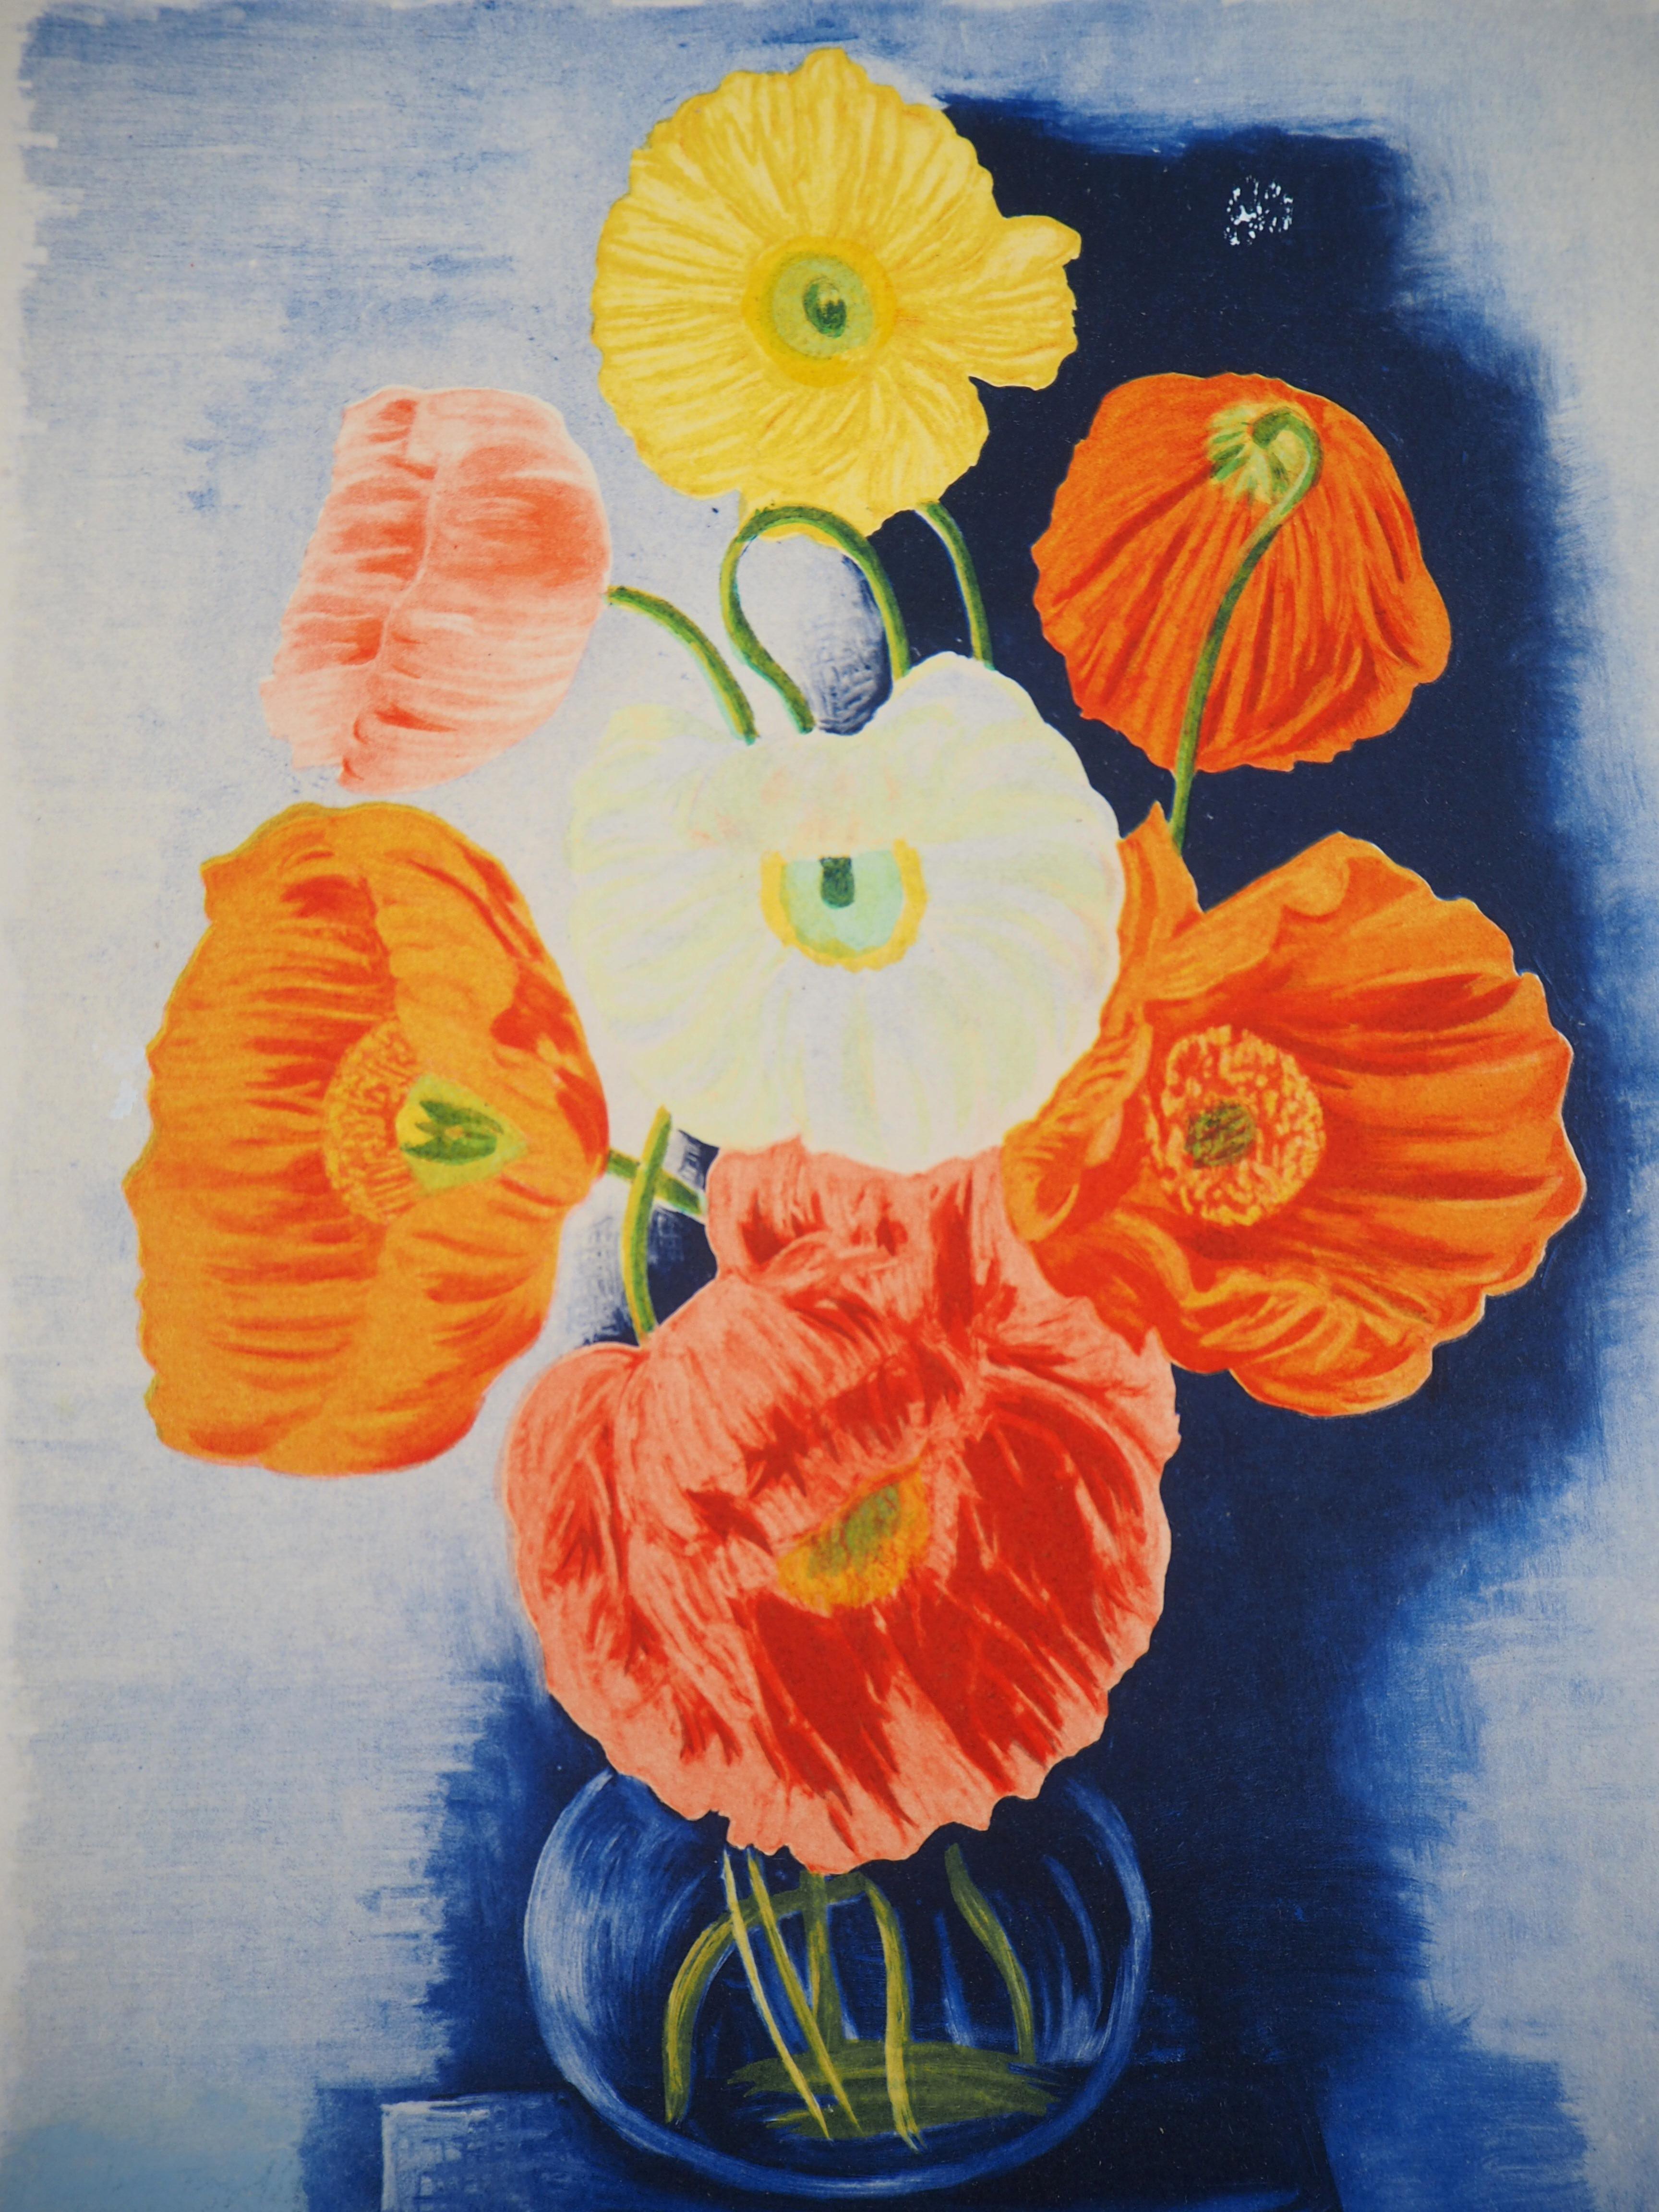 Bouquet of Poppies - Original Lithograph - Print by Moise Kisling